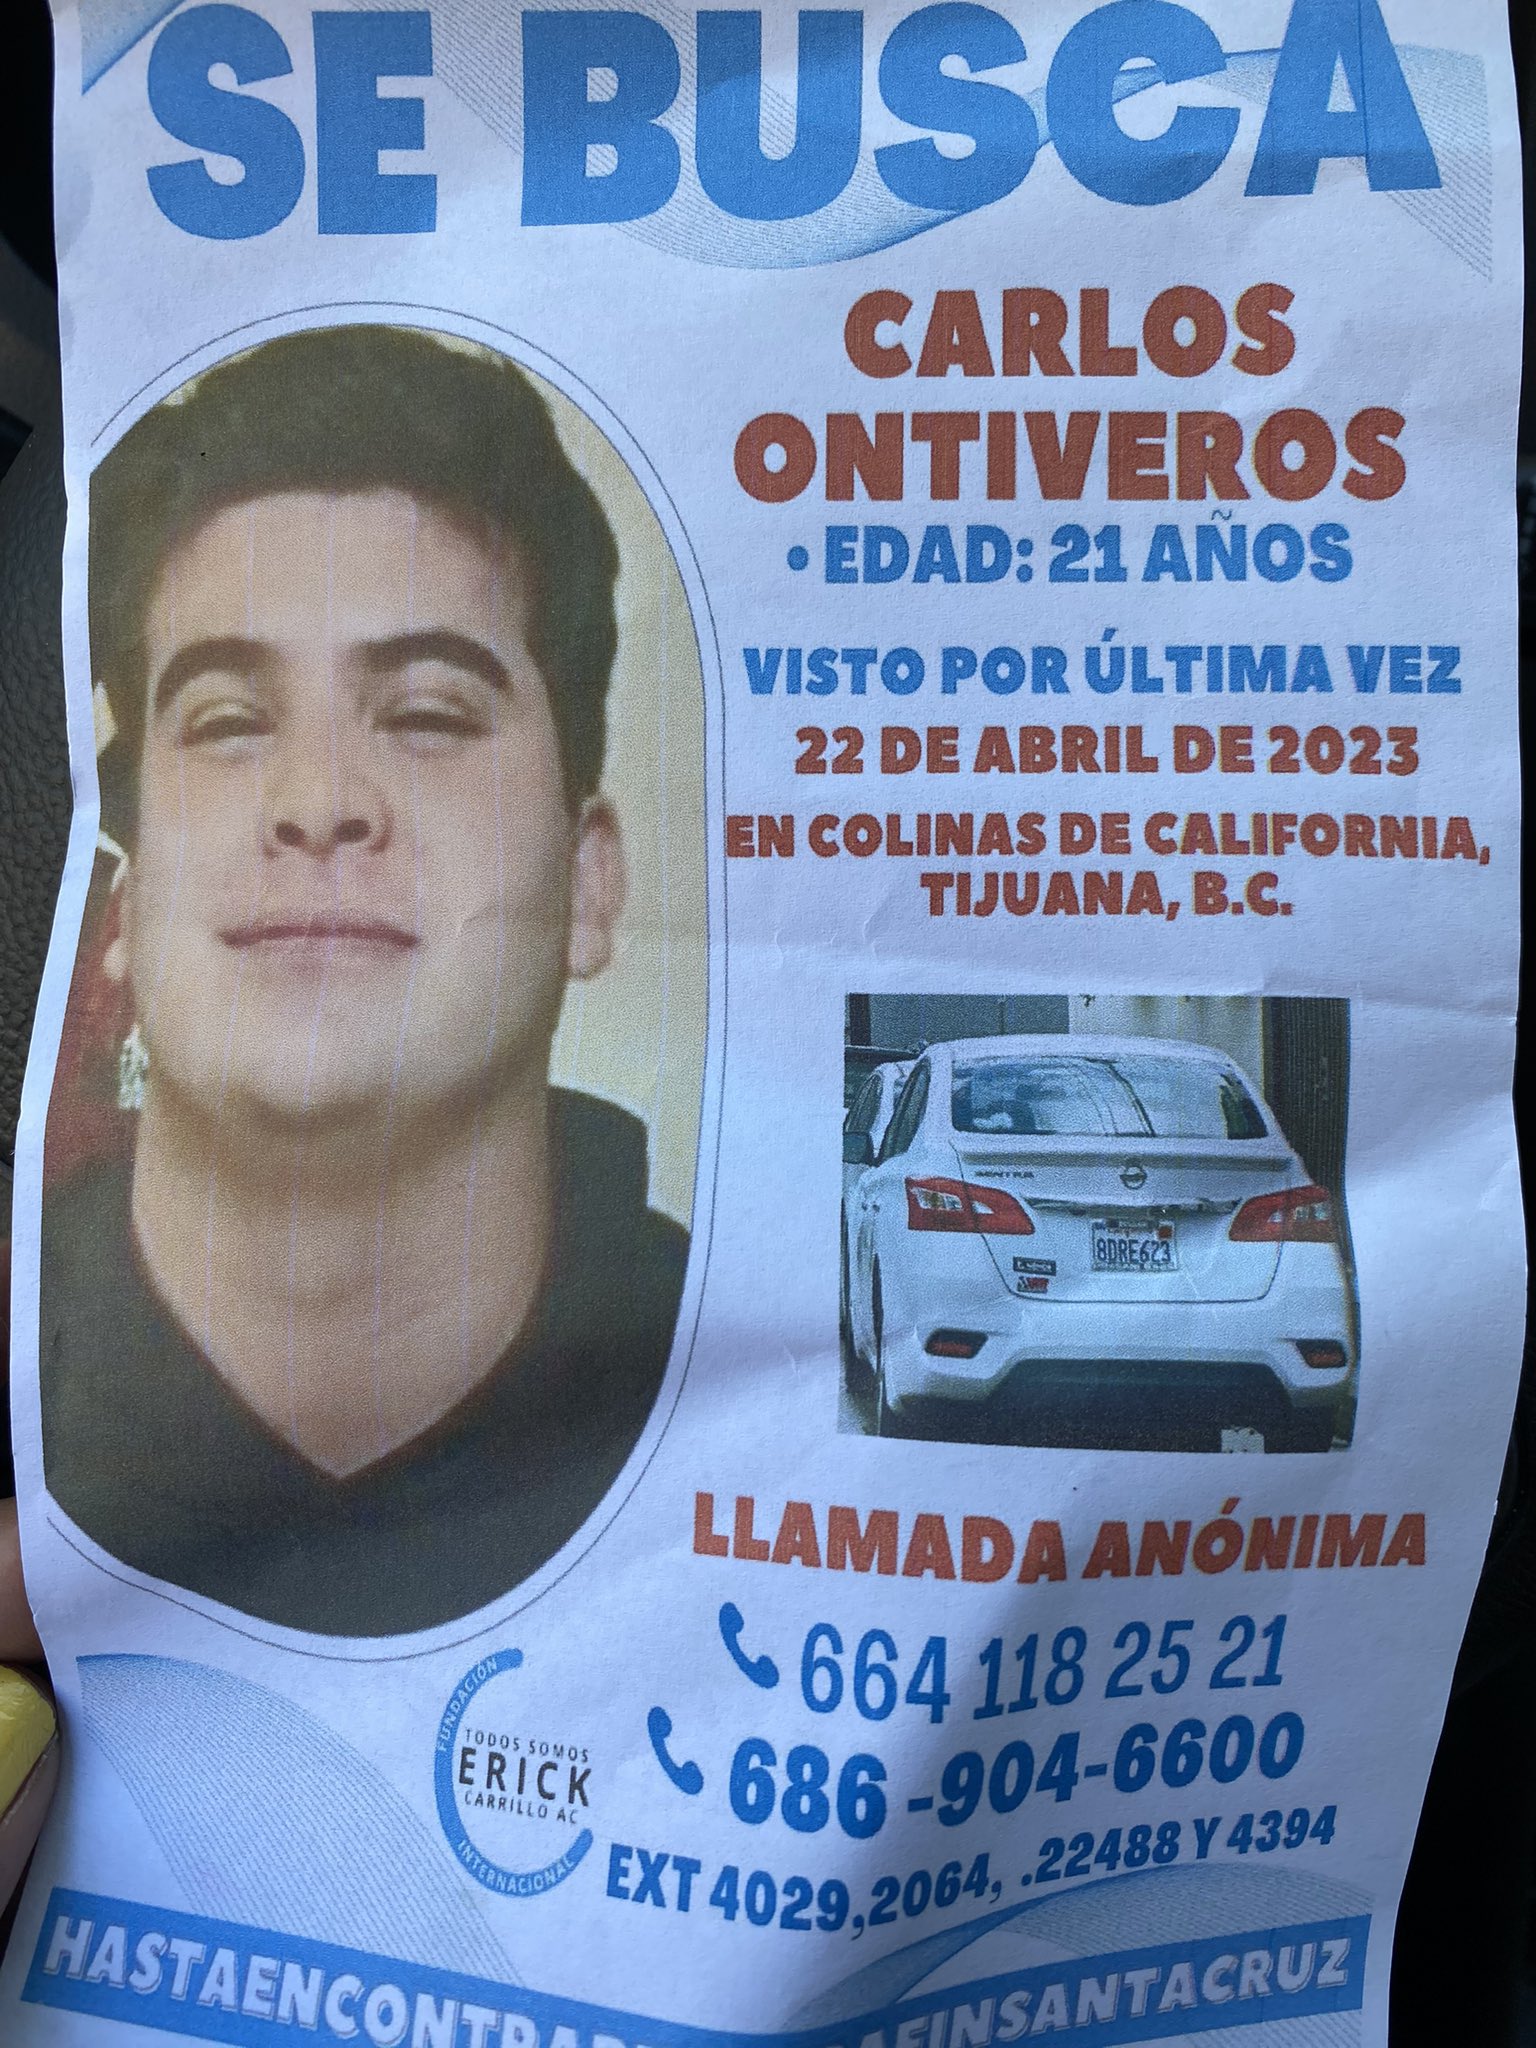 After the disappearance of the 21-year-old, bulletins with his face and characteristics were distributed in the area where he was last seen (Twitter/@MareaVerdeMex)